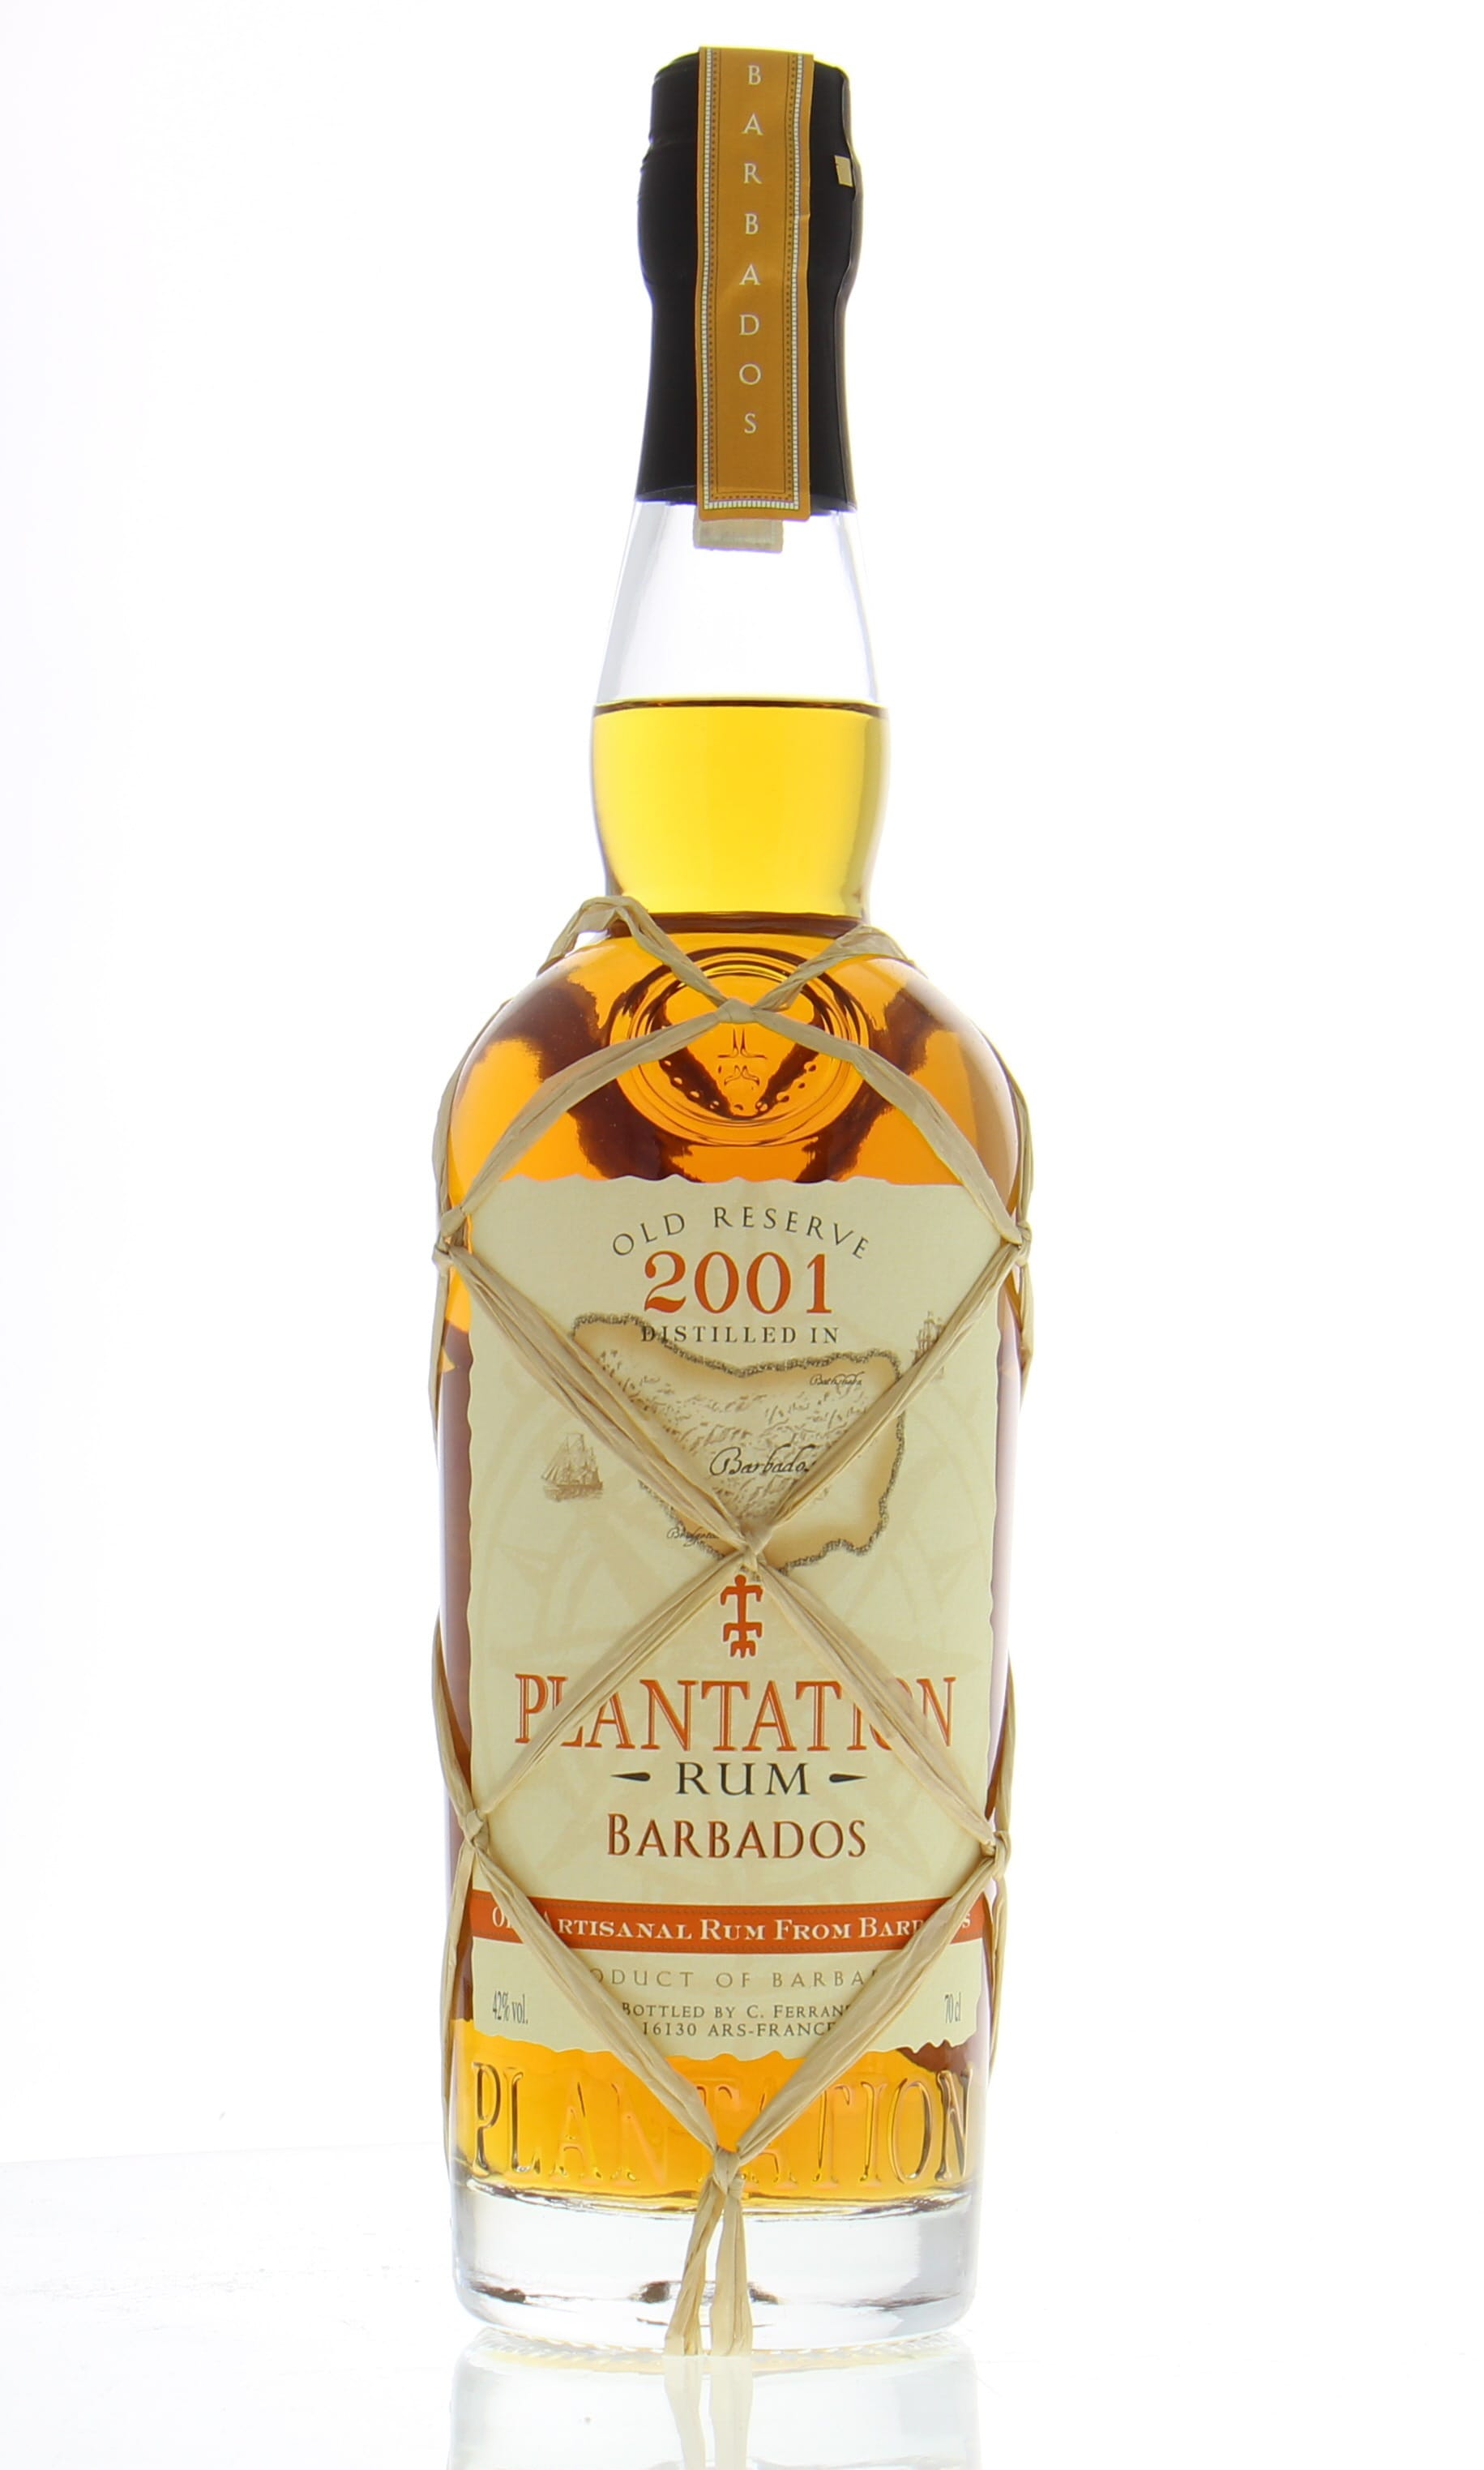 Plantation Rum - Barbados old reserve 2001 42% 2001 Perfect